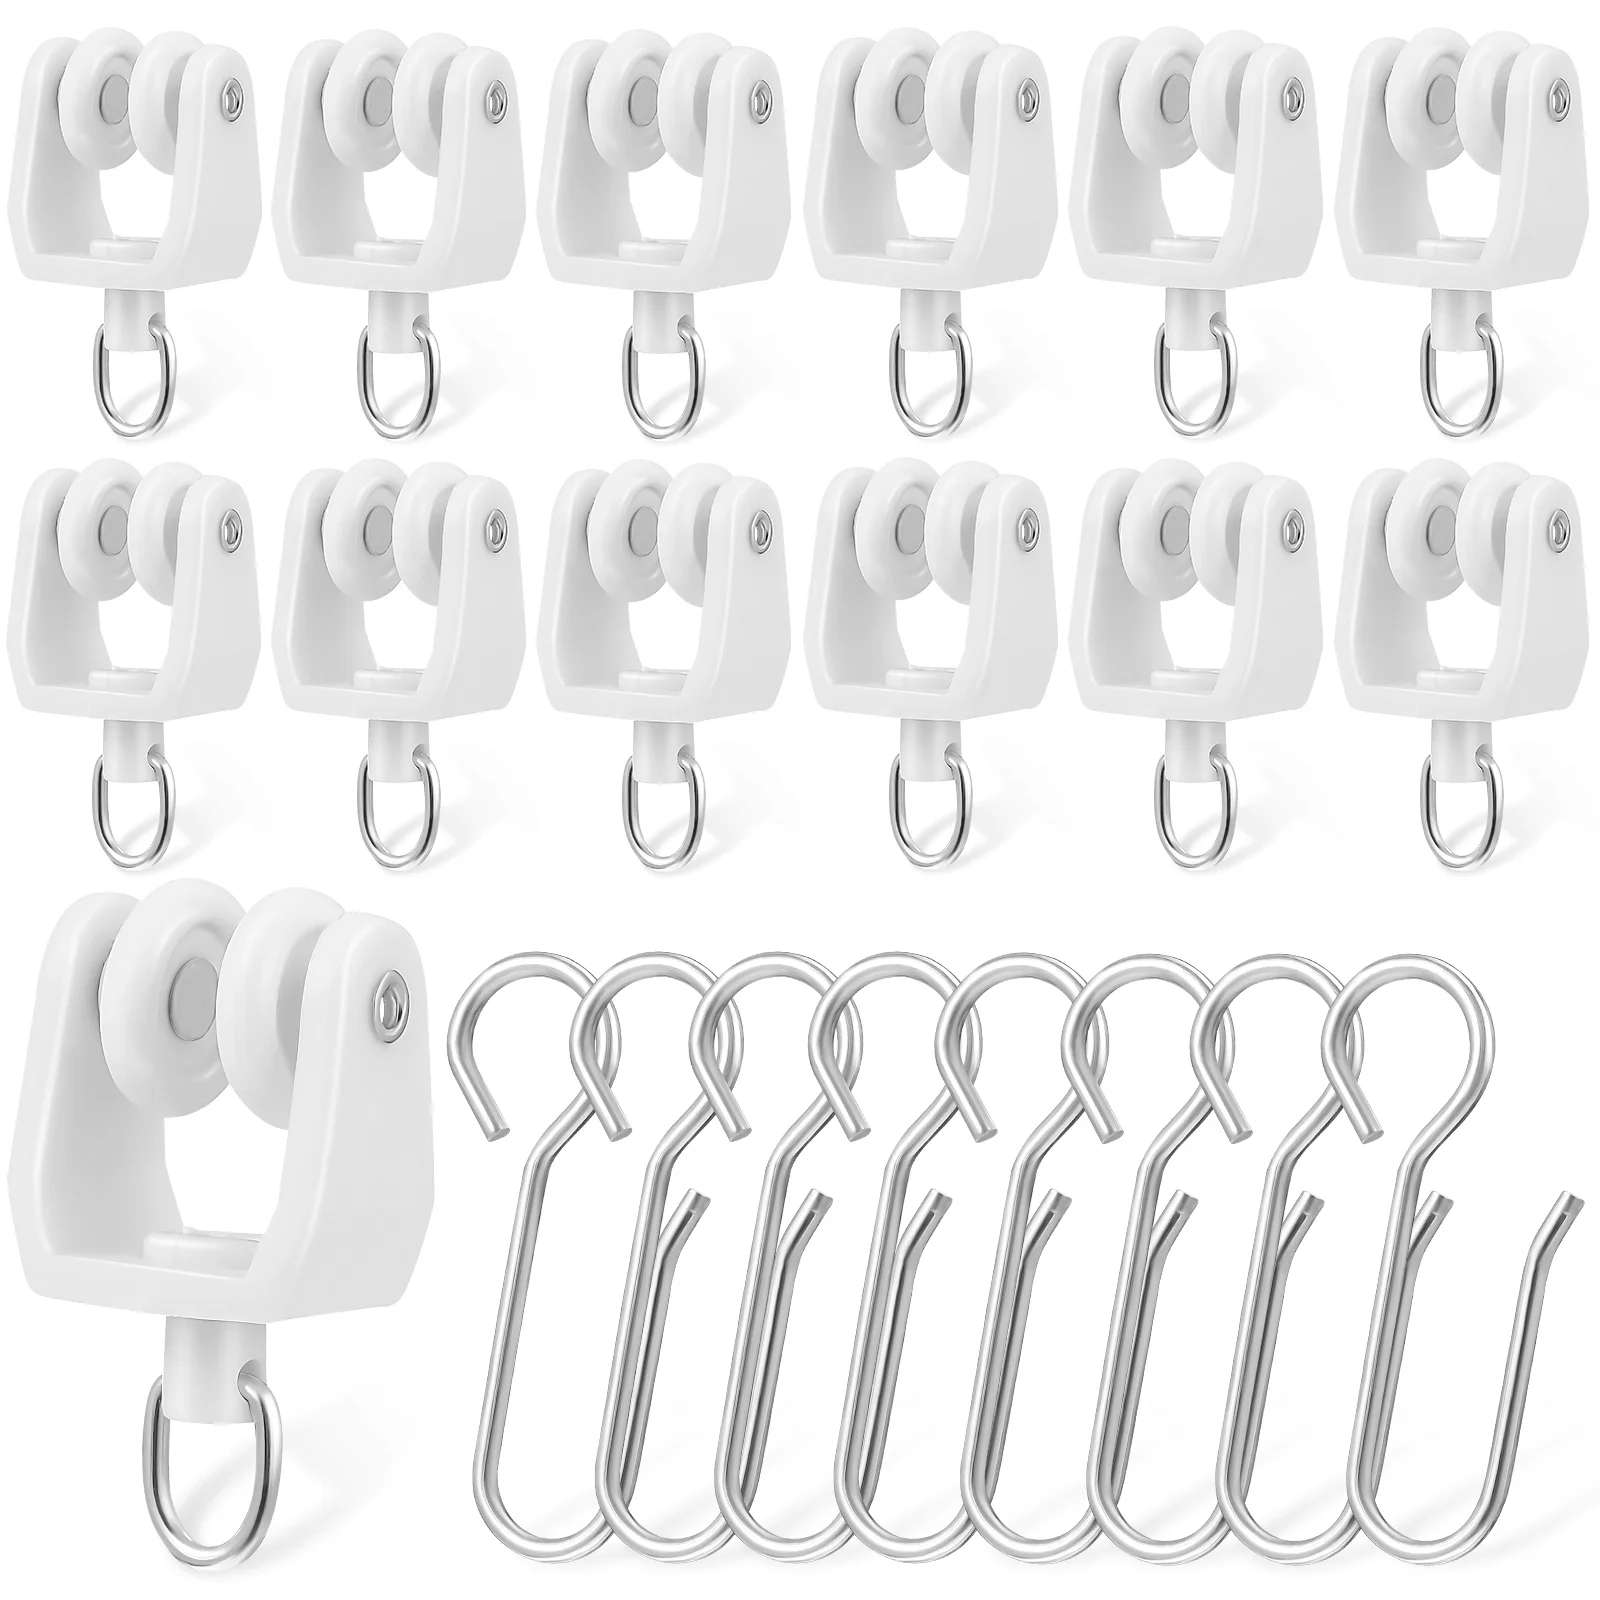 

30 Pcs Curtain Gliders with Hooks for Curtain Tracks Carrier Rollers and Hooks for Curtain Rails